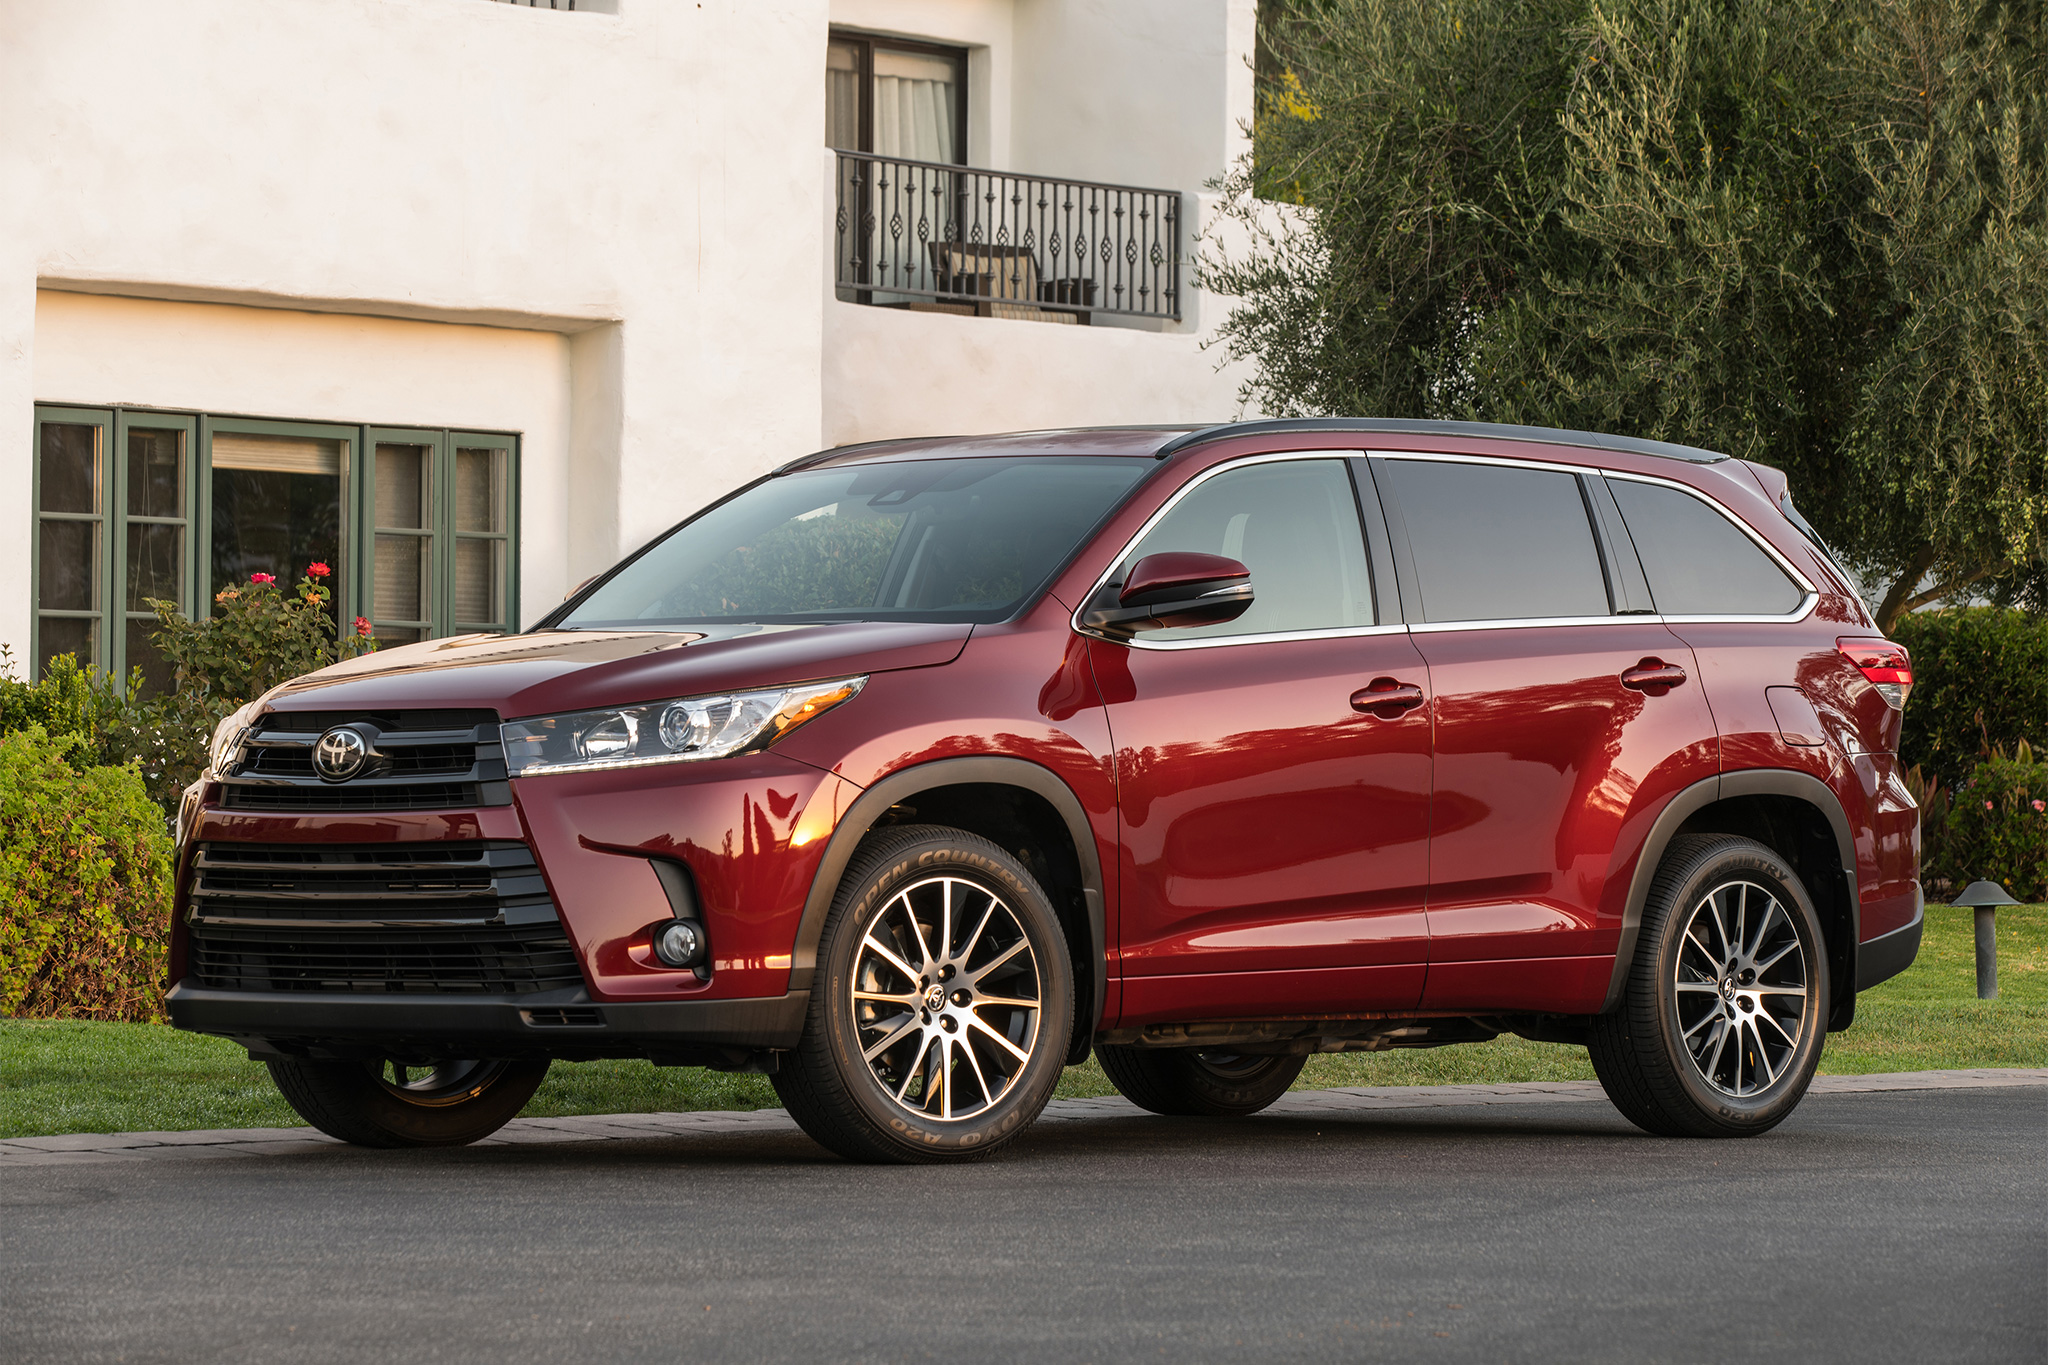 2017 Toyota Highlander: What Does it Share With the Lexus LS